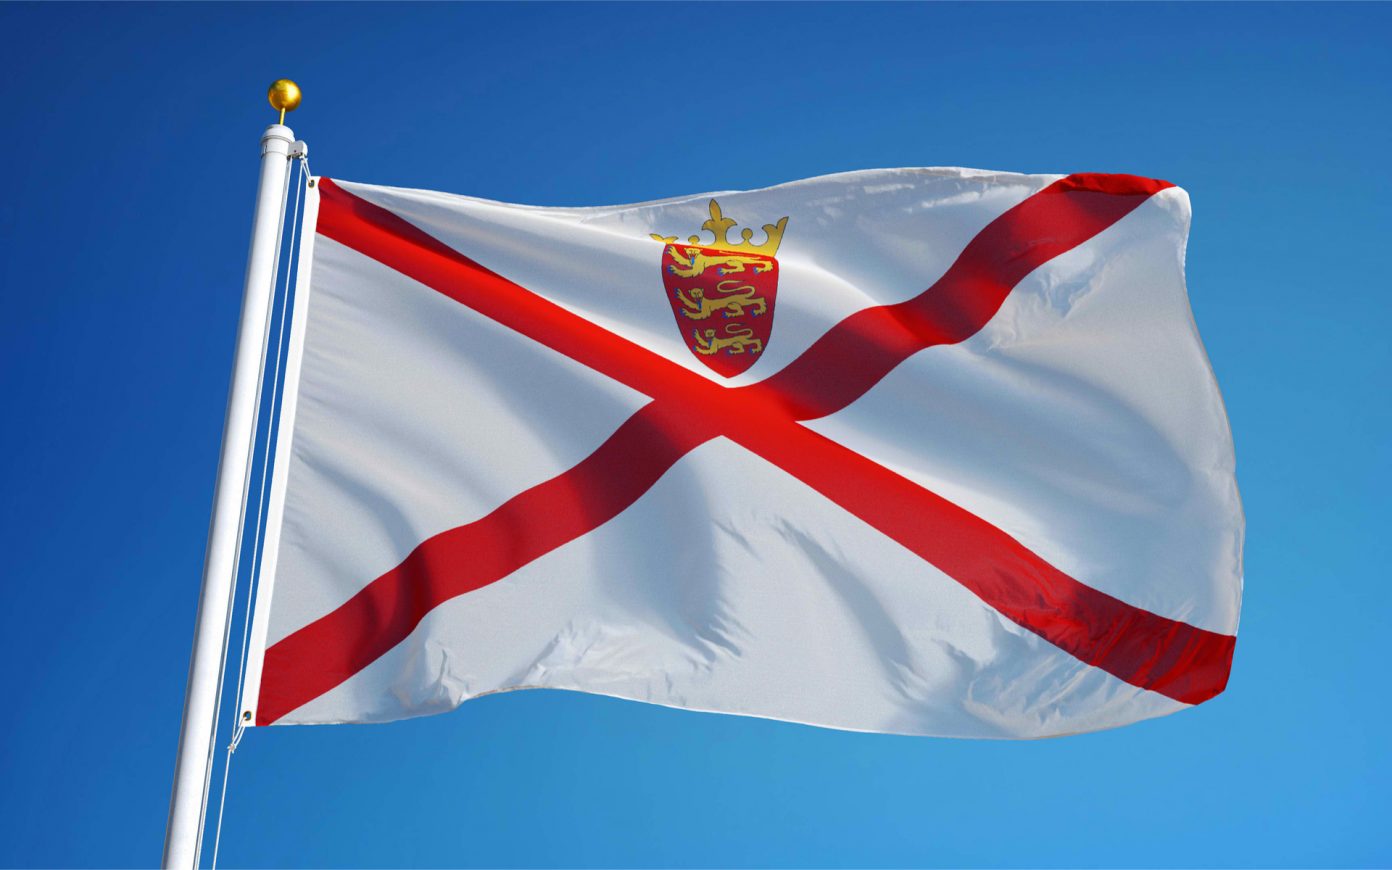 Binance Launches Euro and Pound Fiat-to-Crypto Platform in Jersey